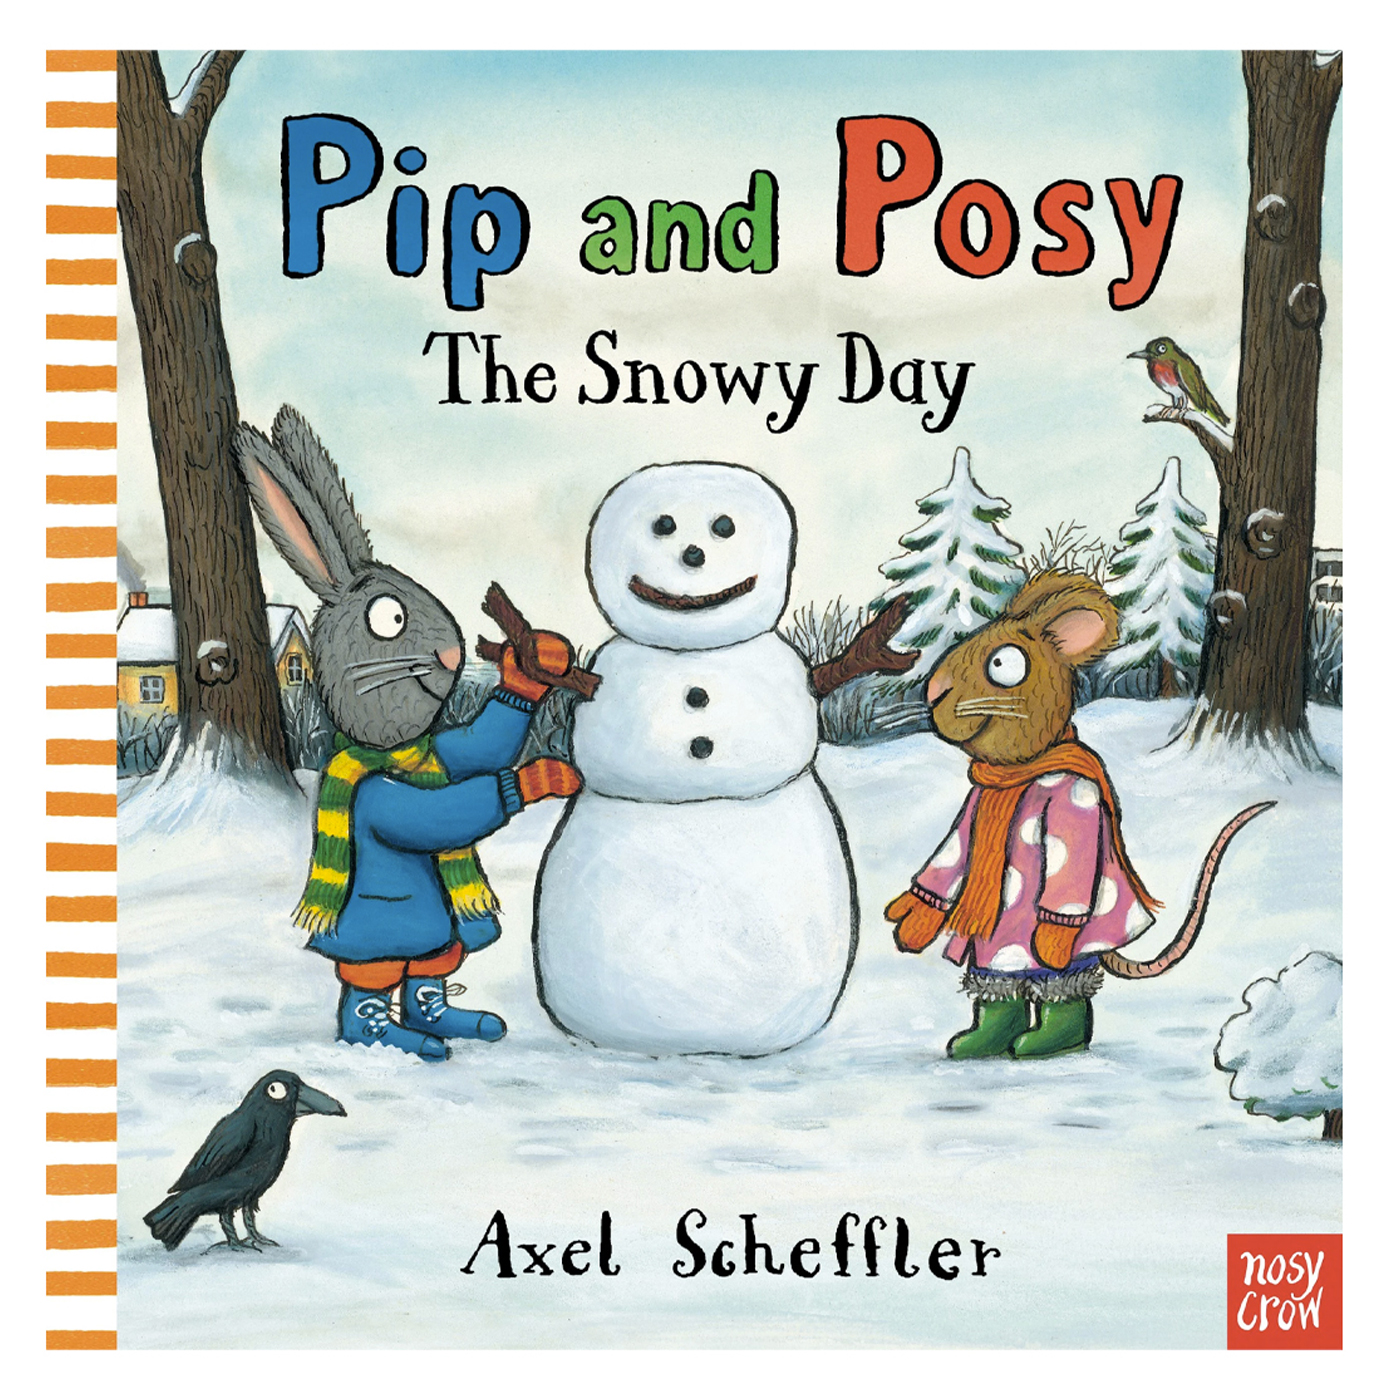  Pip and Posy: The Snowy Day